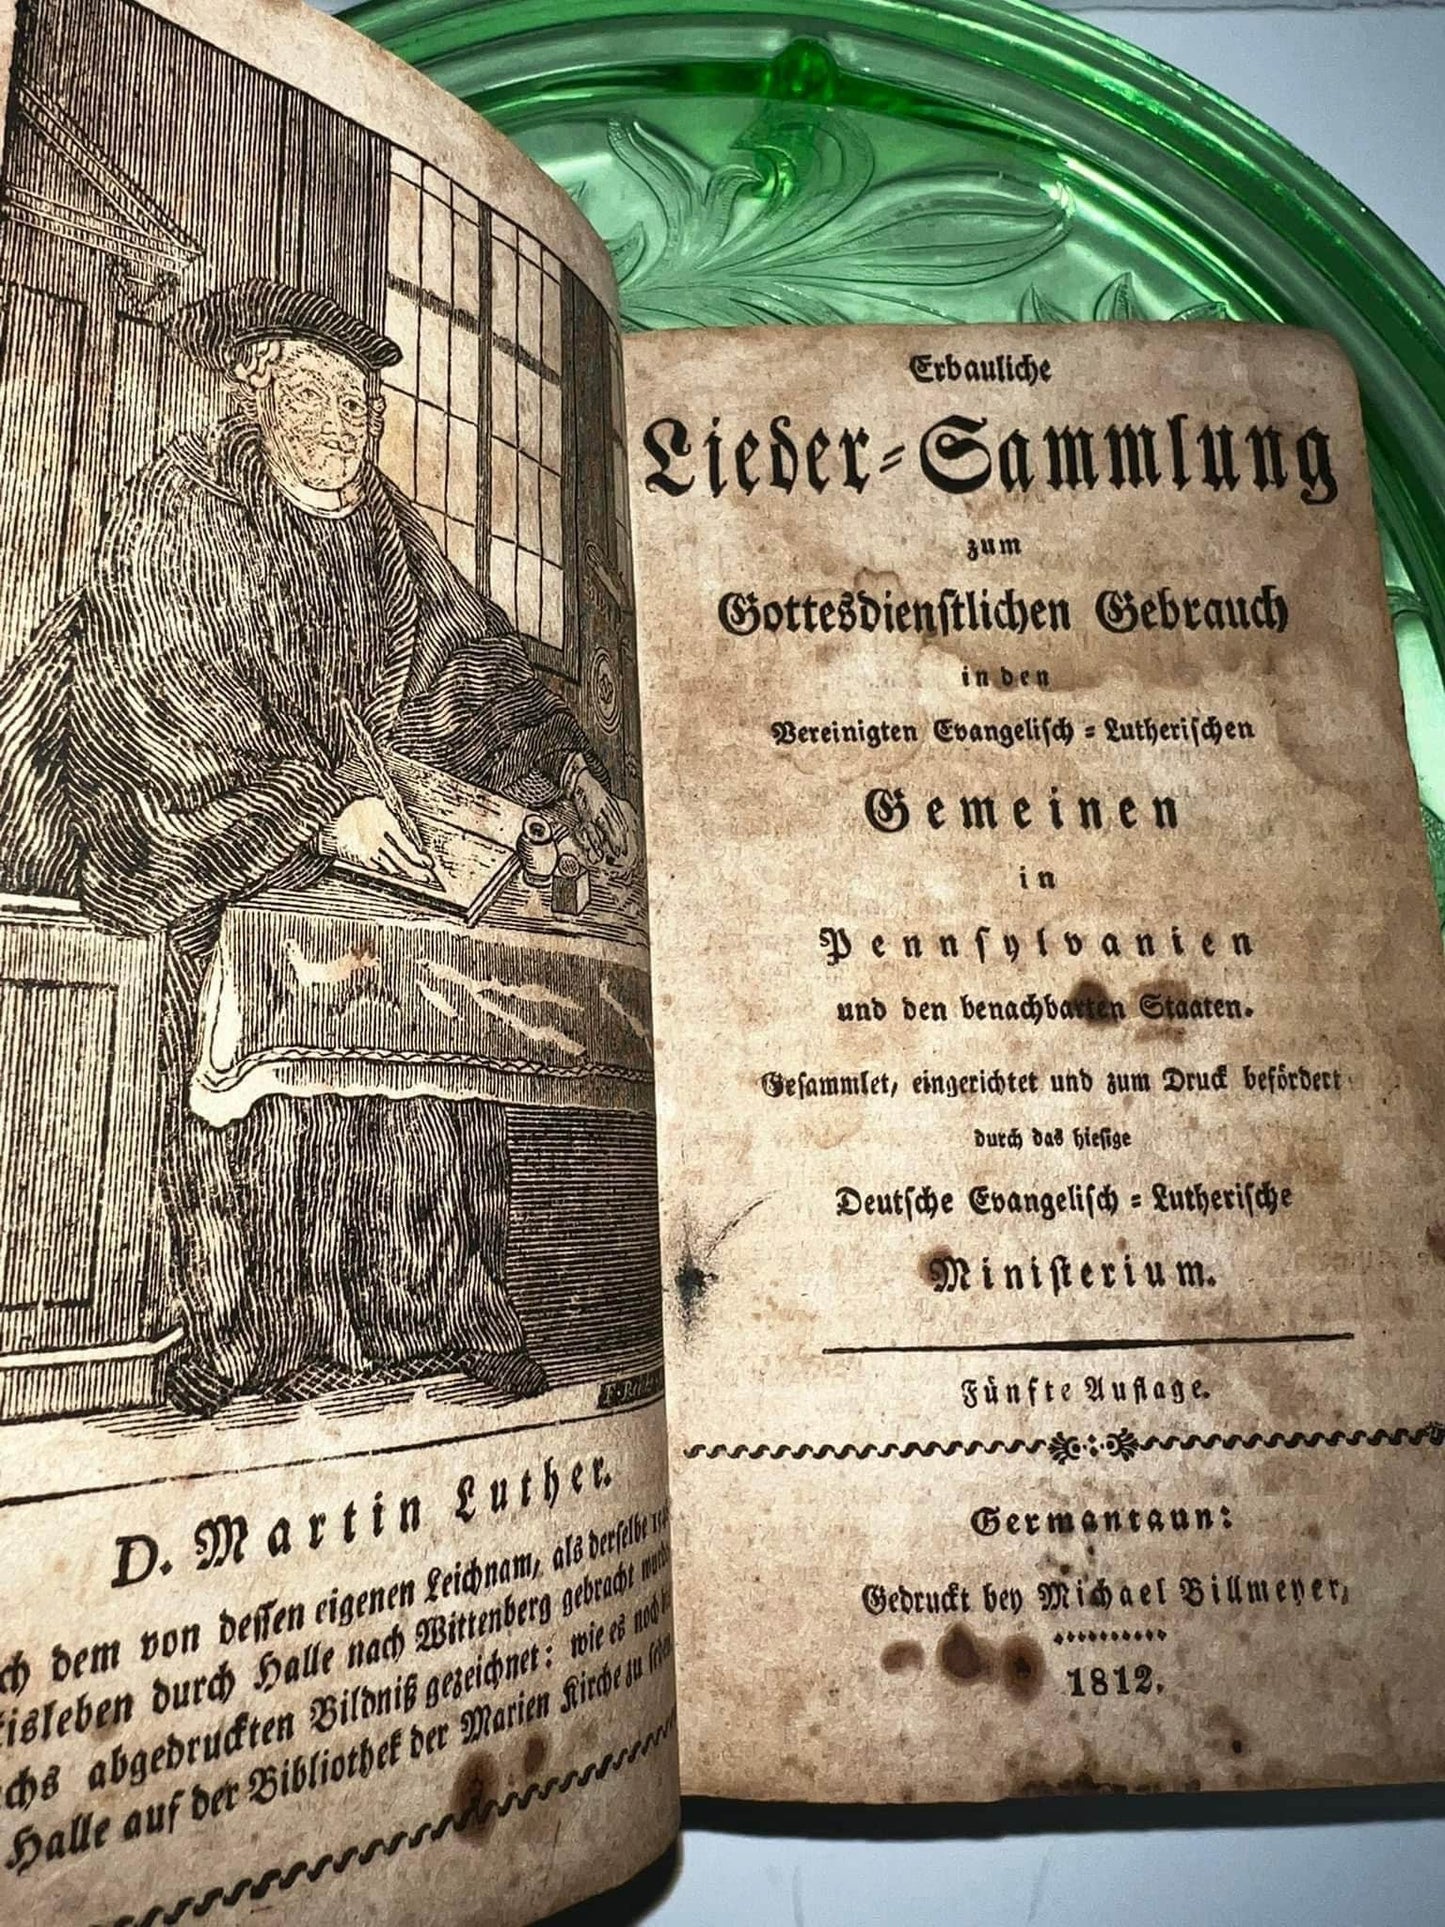 Antique 1812 Pennsylvania German Song collection for religious use in the United evangelical Lutheran congregations In Pennsylvania